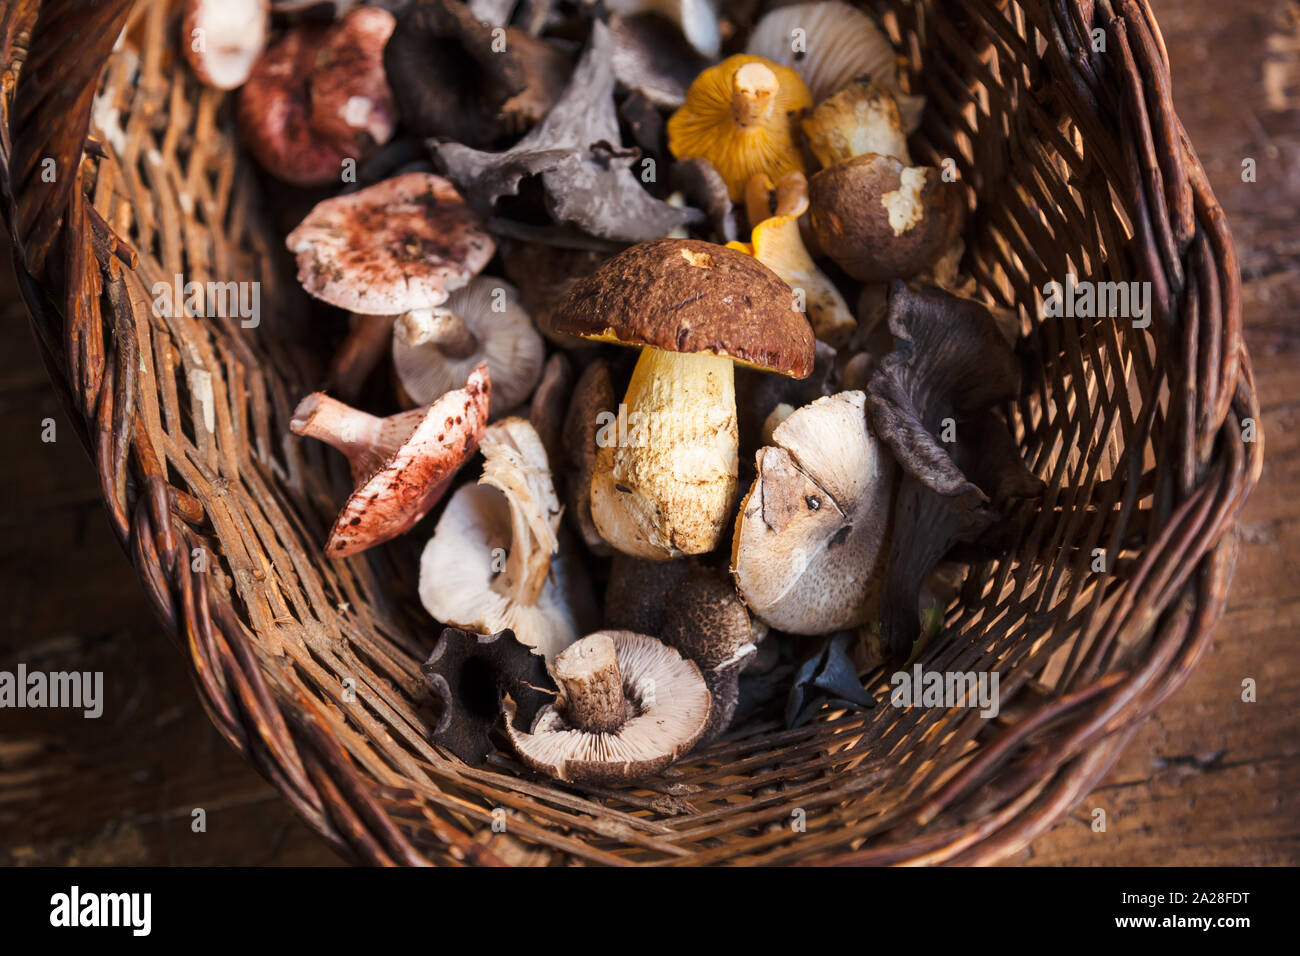 Closeup of a mix of fresh picked mushrooms in a rustic wicker on a wooden table Stock Photo